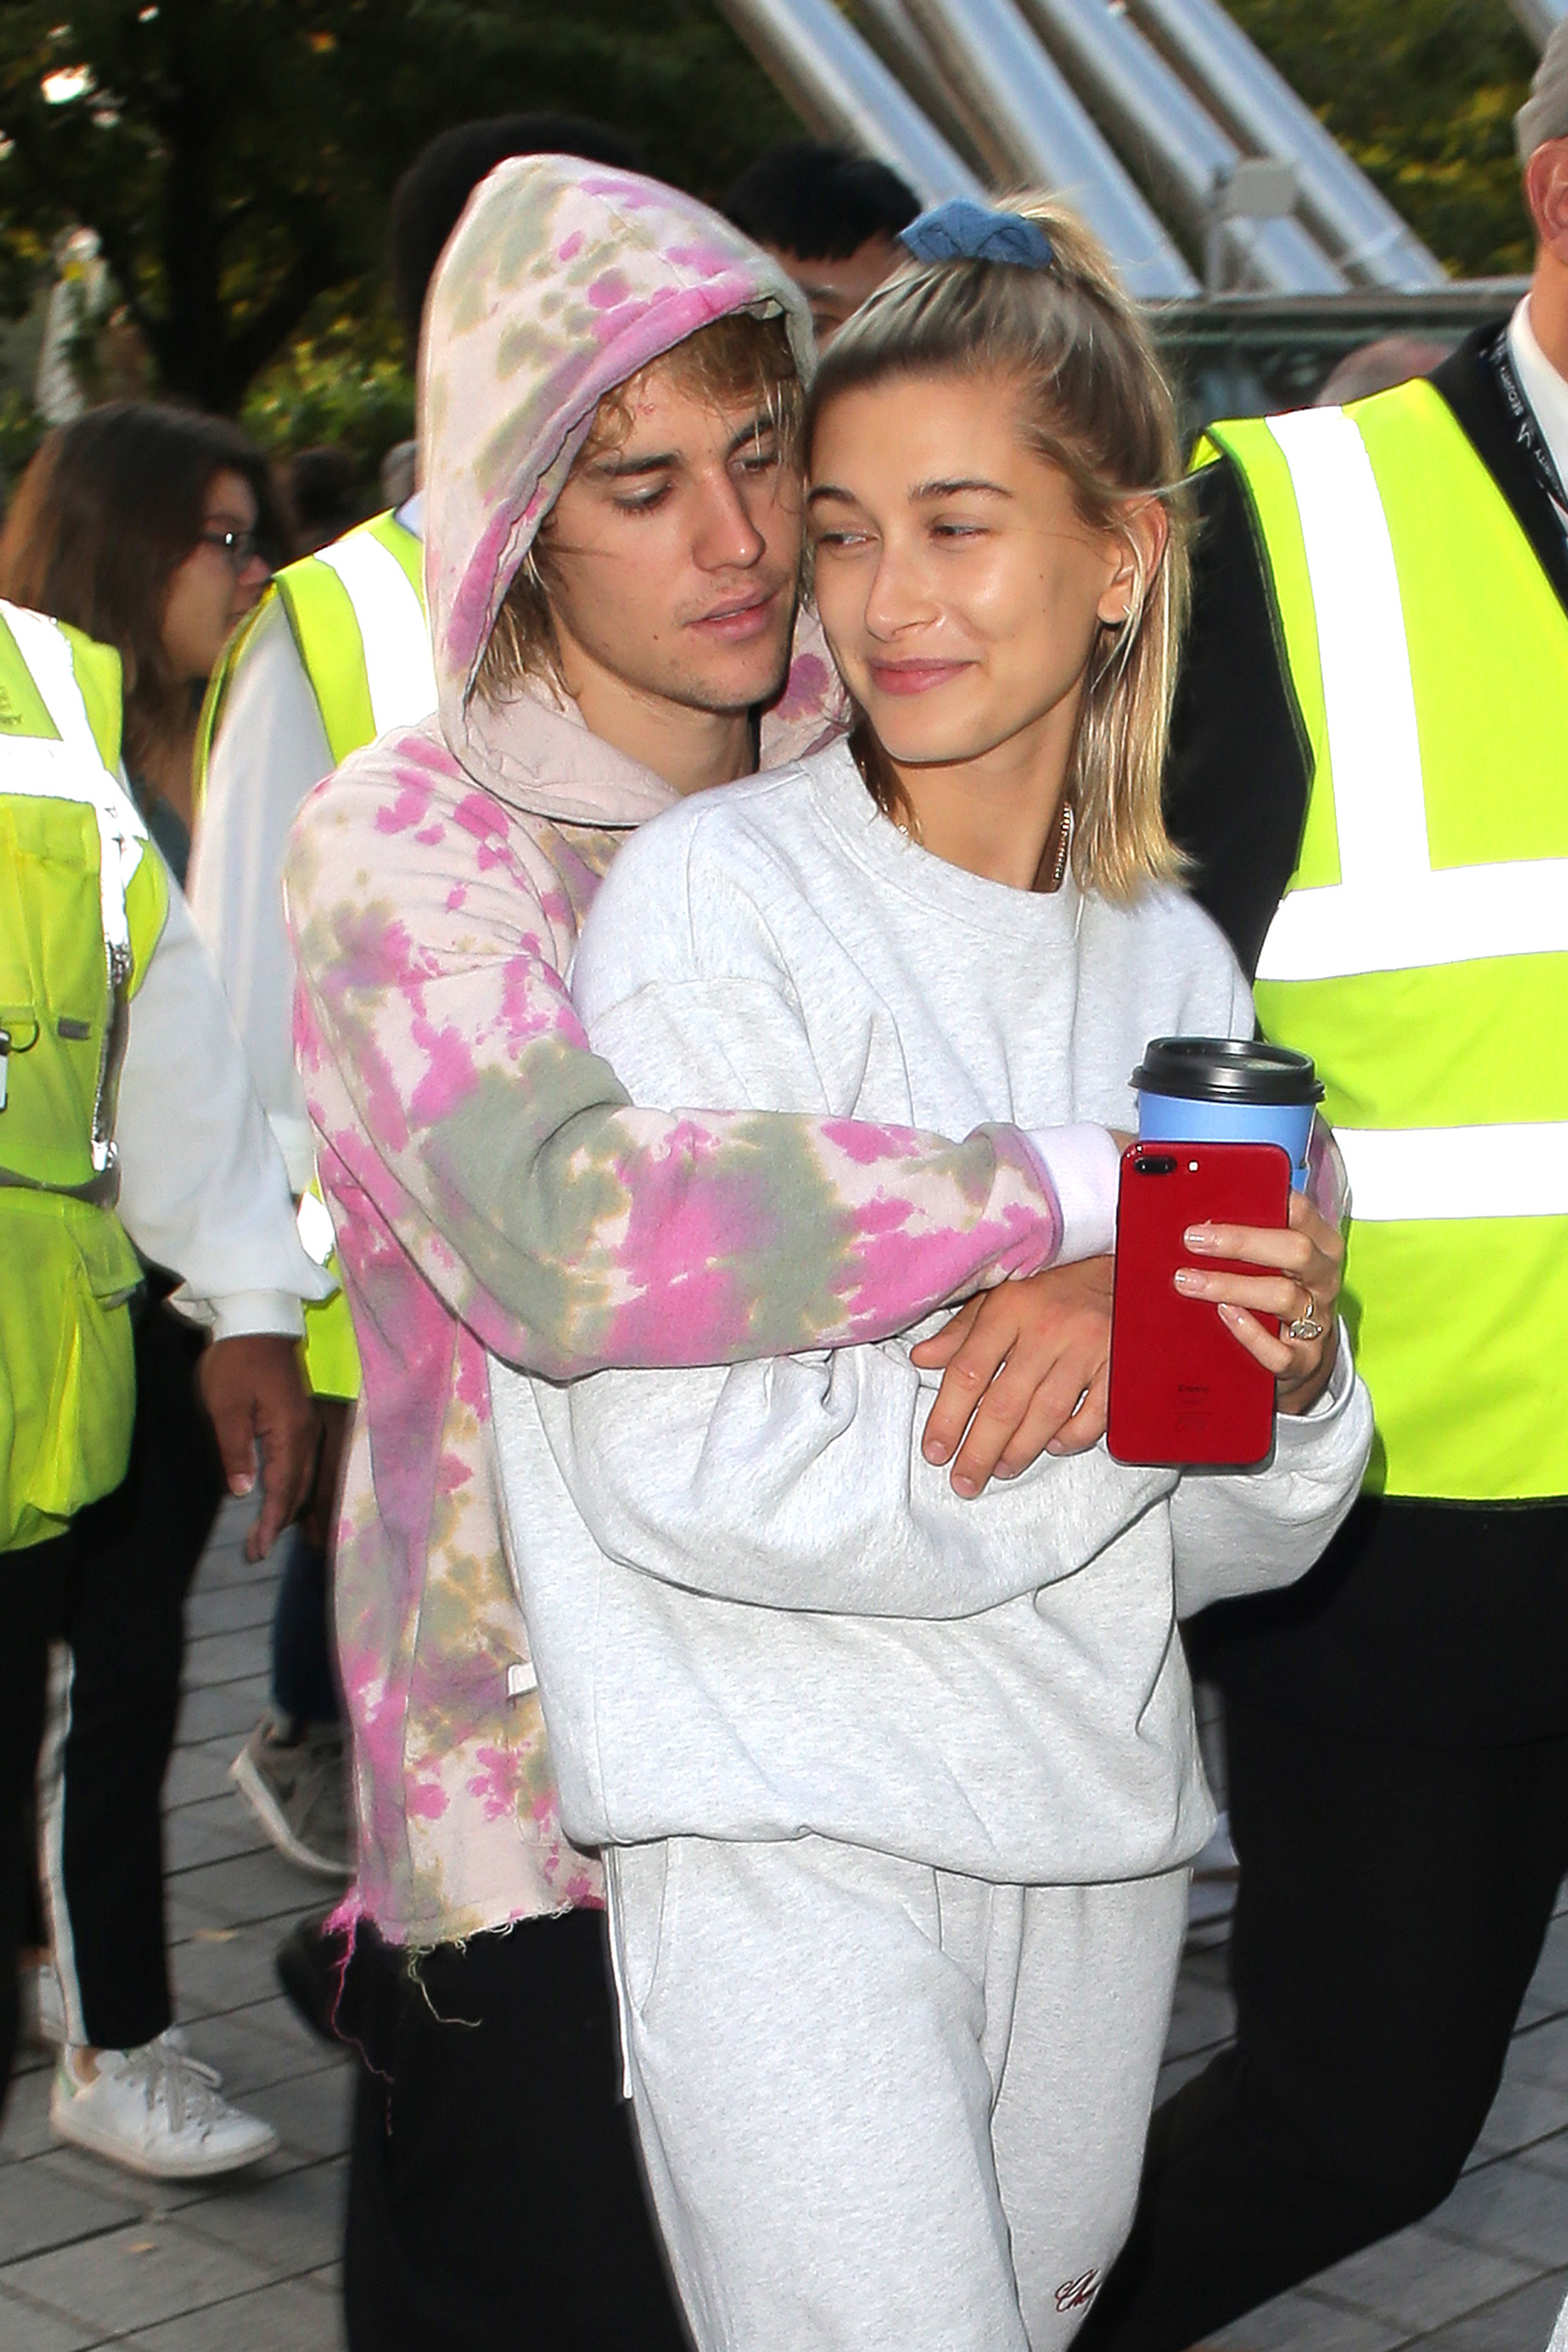 Justin Bieber and Hailey Baldwin seen at the London Eye in London, England, on September 18, 2018. | Source: Getty Images